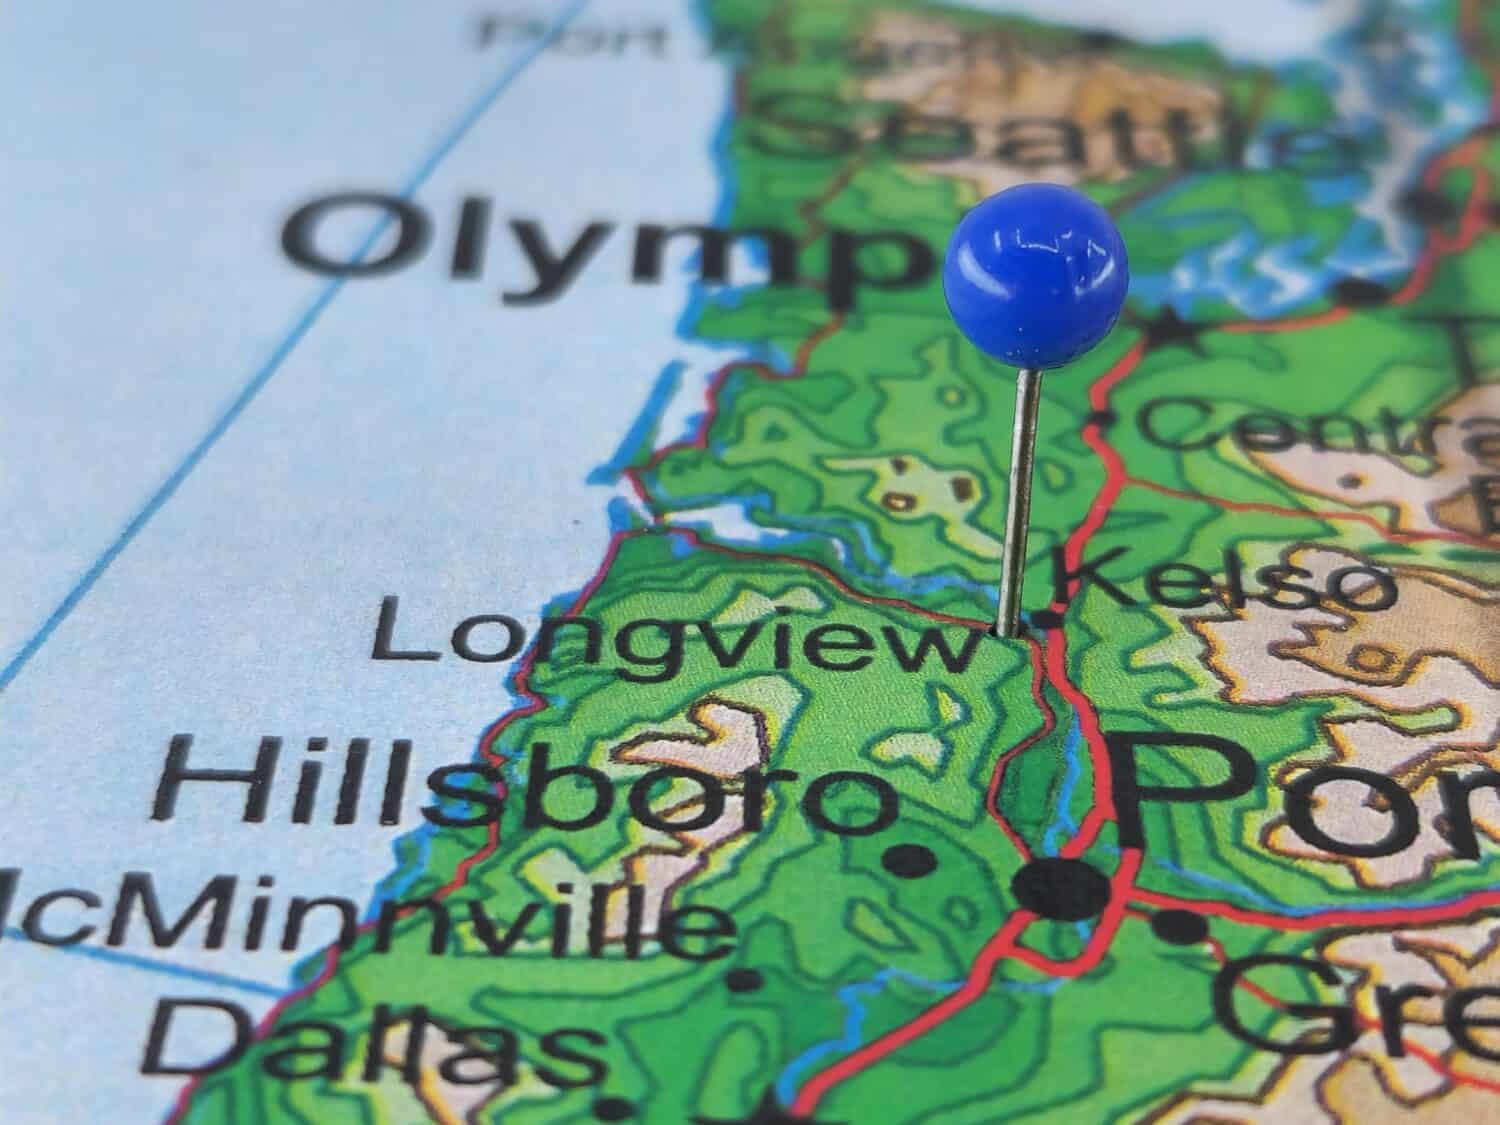 Longview, Washington marked by a blue map tack. The City of Longview is the county seat of Cowlitz County, WA.